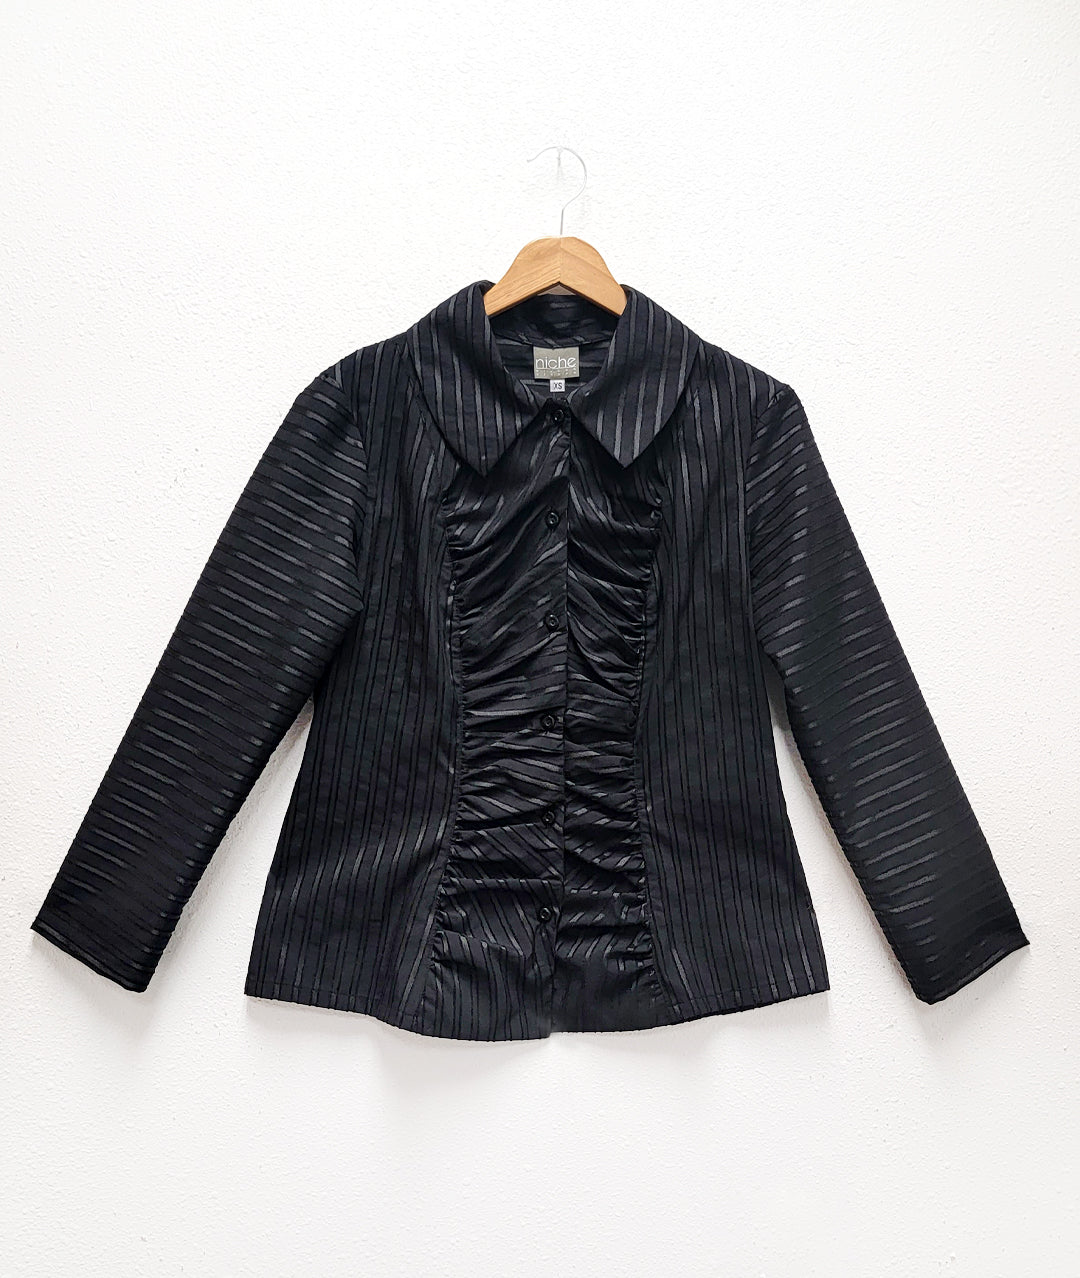 black on black striped blouse with a gathered detail up the center front along princess seams